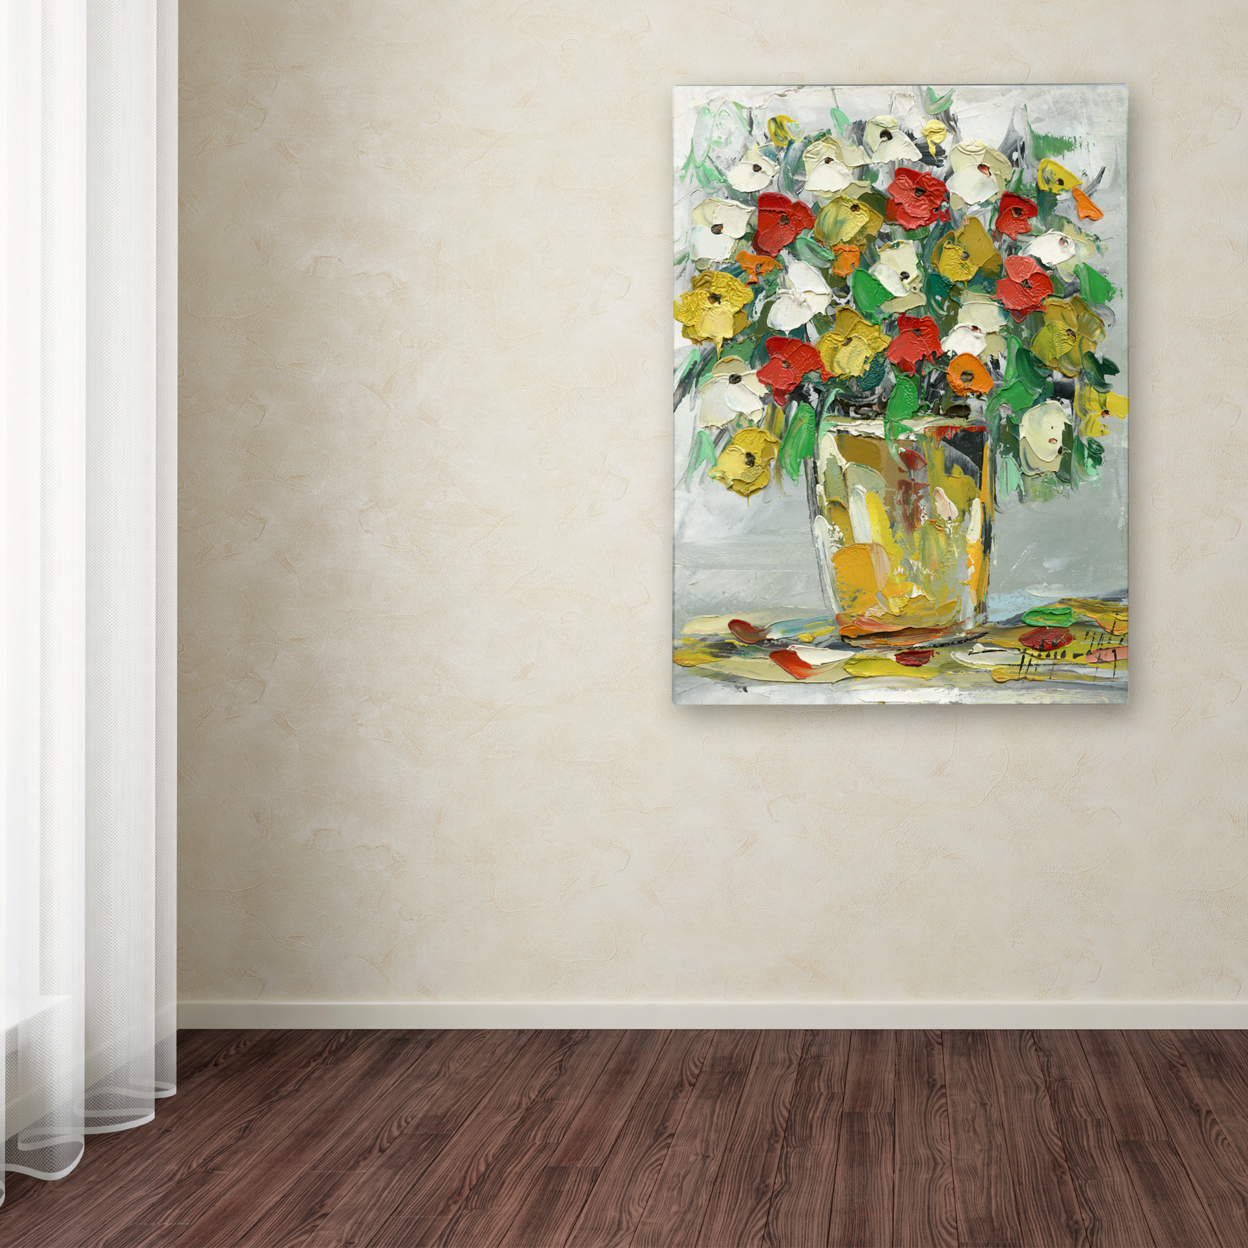 Hai Odelia 'Spring Flowers In A Vase 11' Canvas Wall Art 35 X 47 Inches